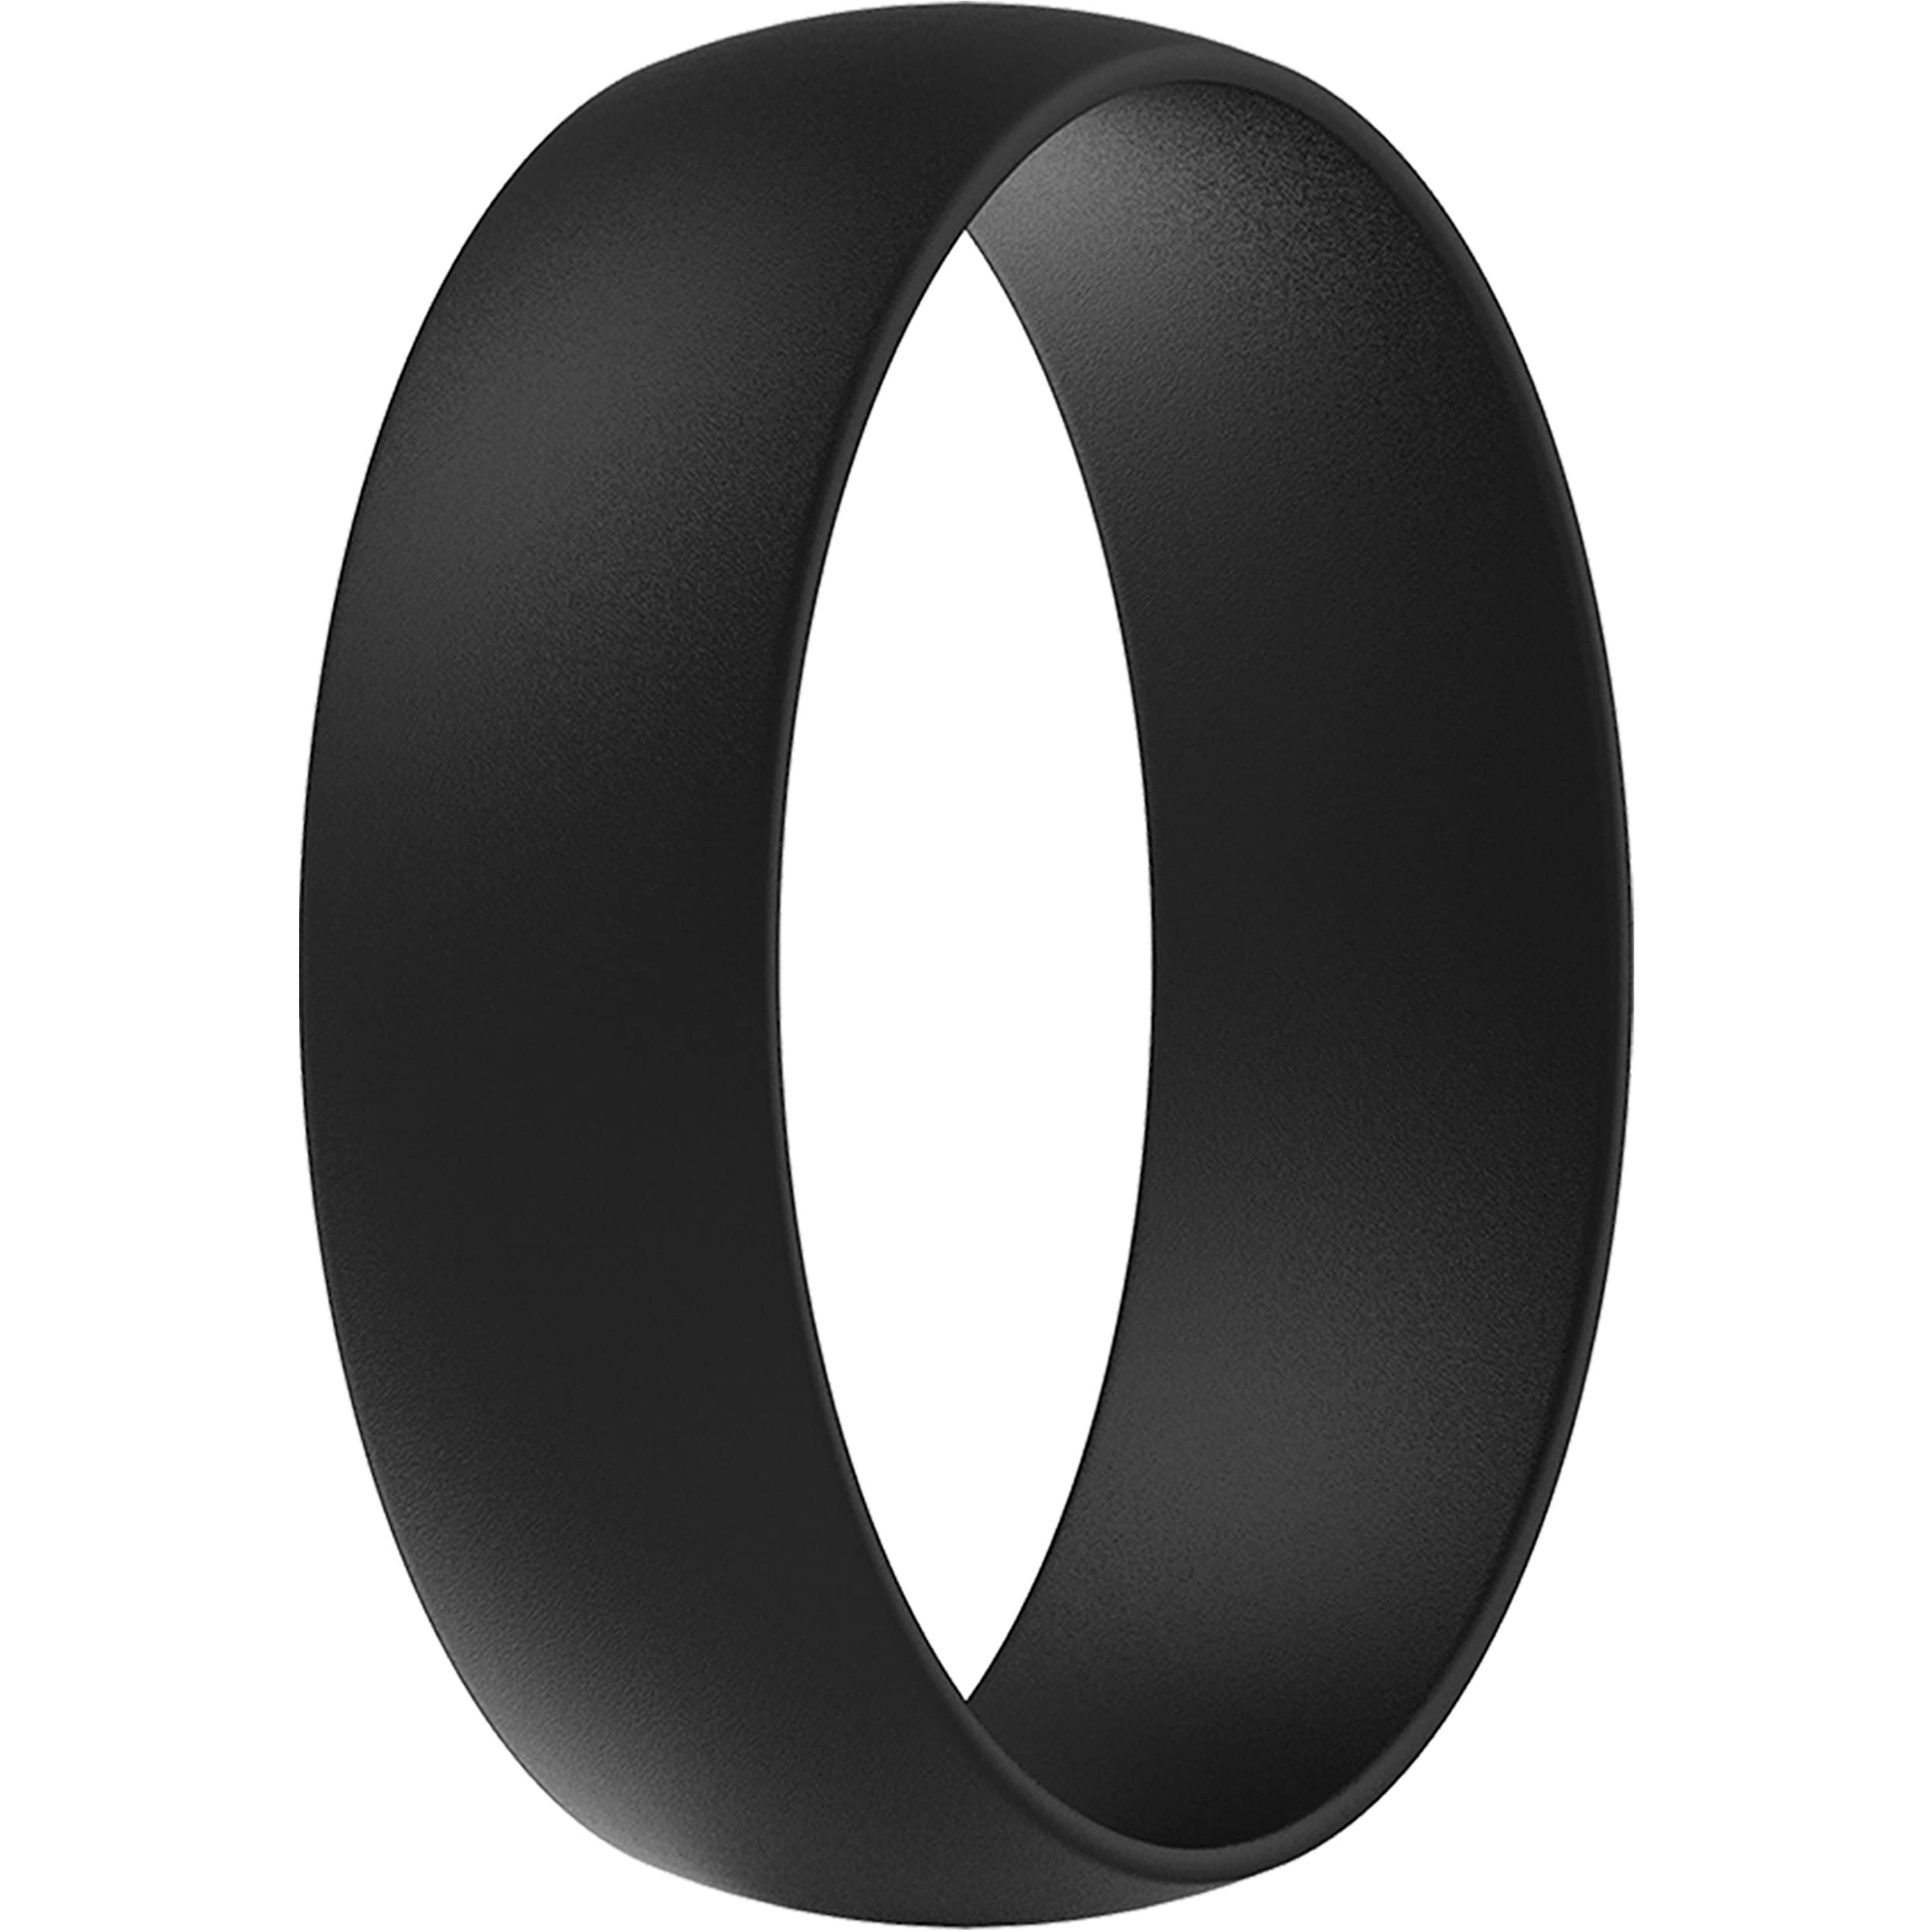 ThunderFit Silicone Ring, Wedding Bands for Men & Women (Black, 12.5-13 (22.2mm))